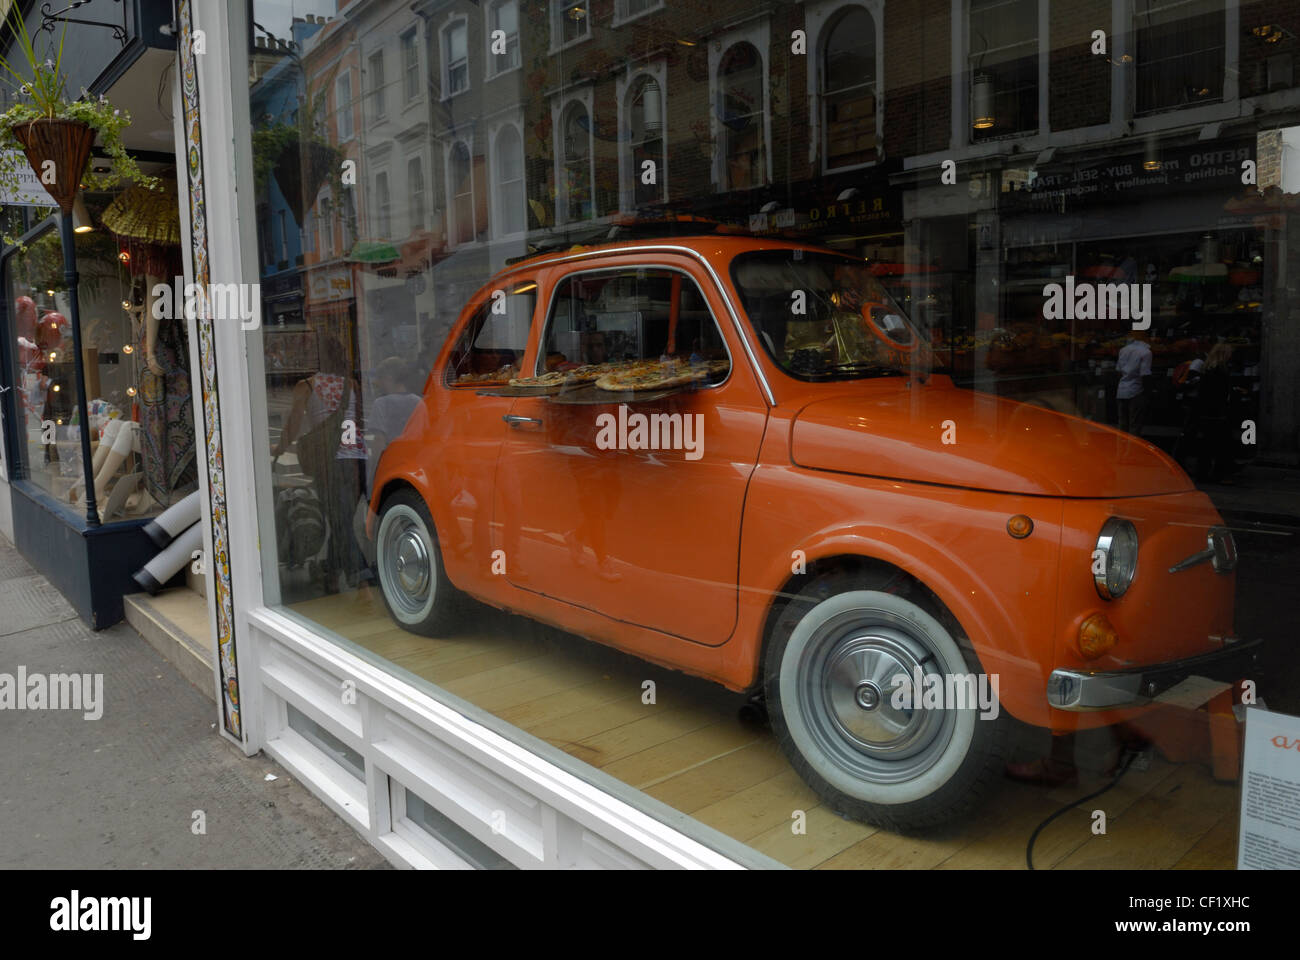 An iconic Fiat 500 car used to display pizzas in the window of a pizza restaurant in Notting Hill. Stock Photo